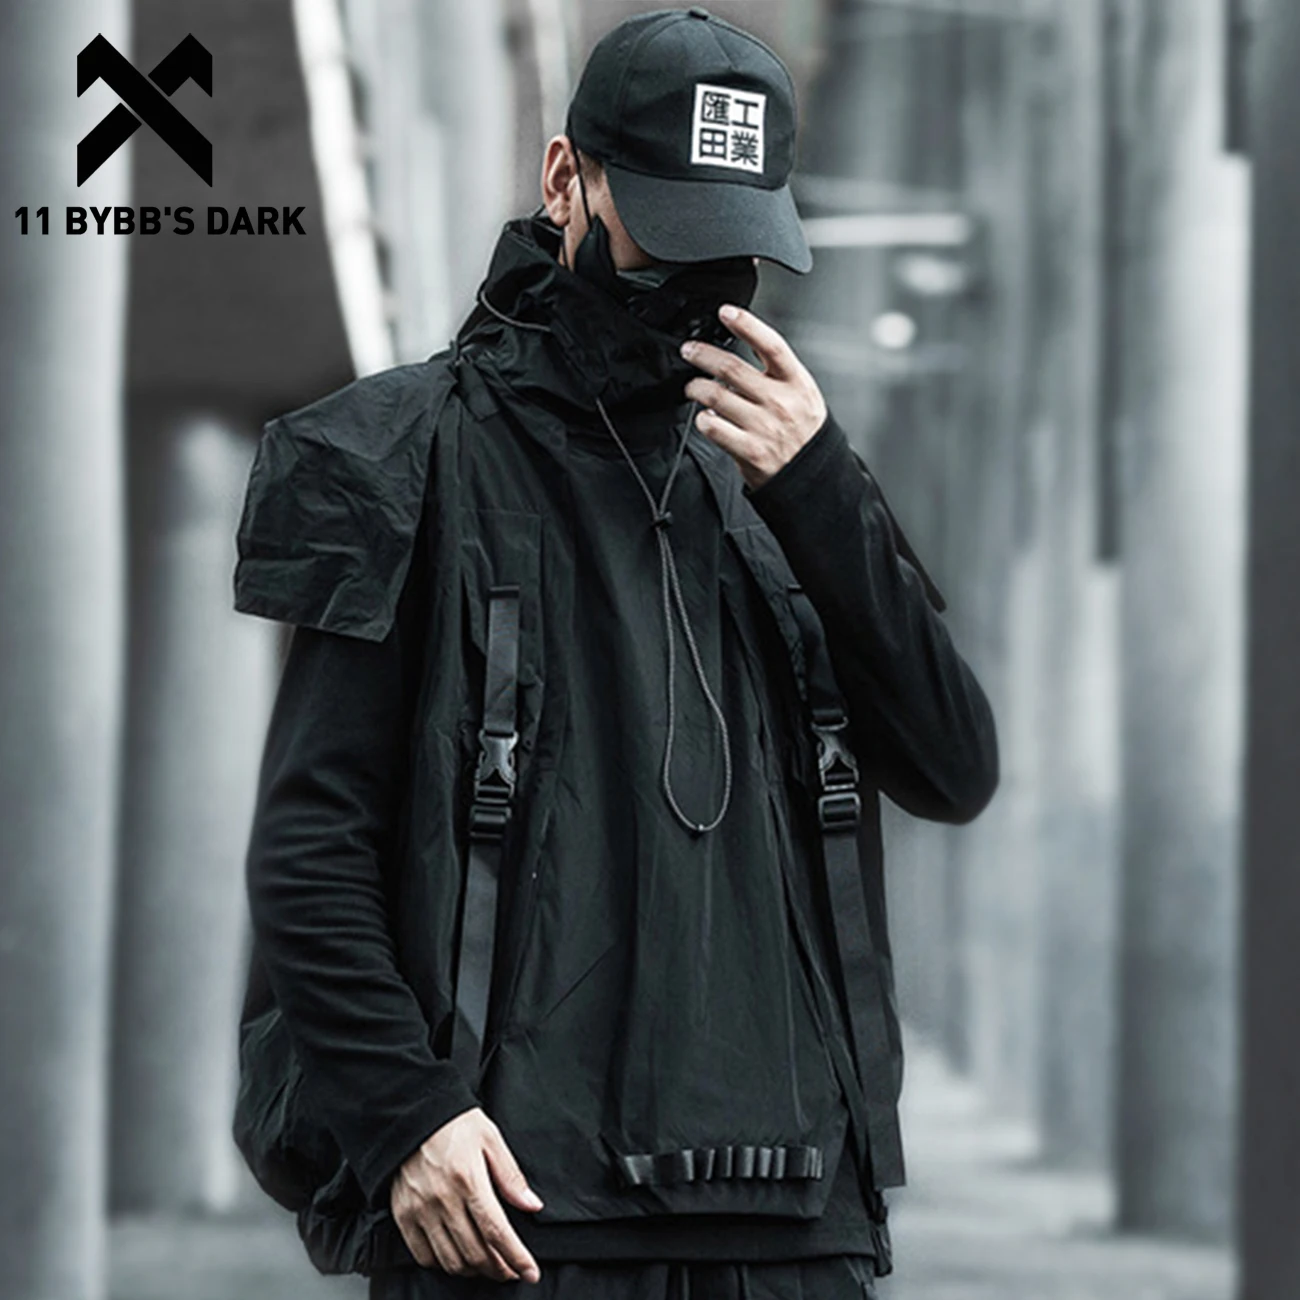 

11 BYBB'S DARK Removable Hip Hop Cargo Vest Men Ribbons Patchwork Tactical Functional Overall Sleeveless Tops Streetwear Outwear